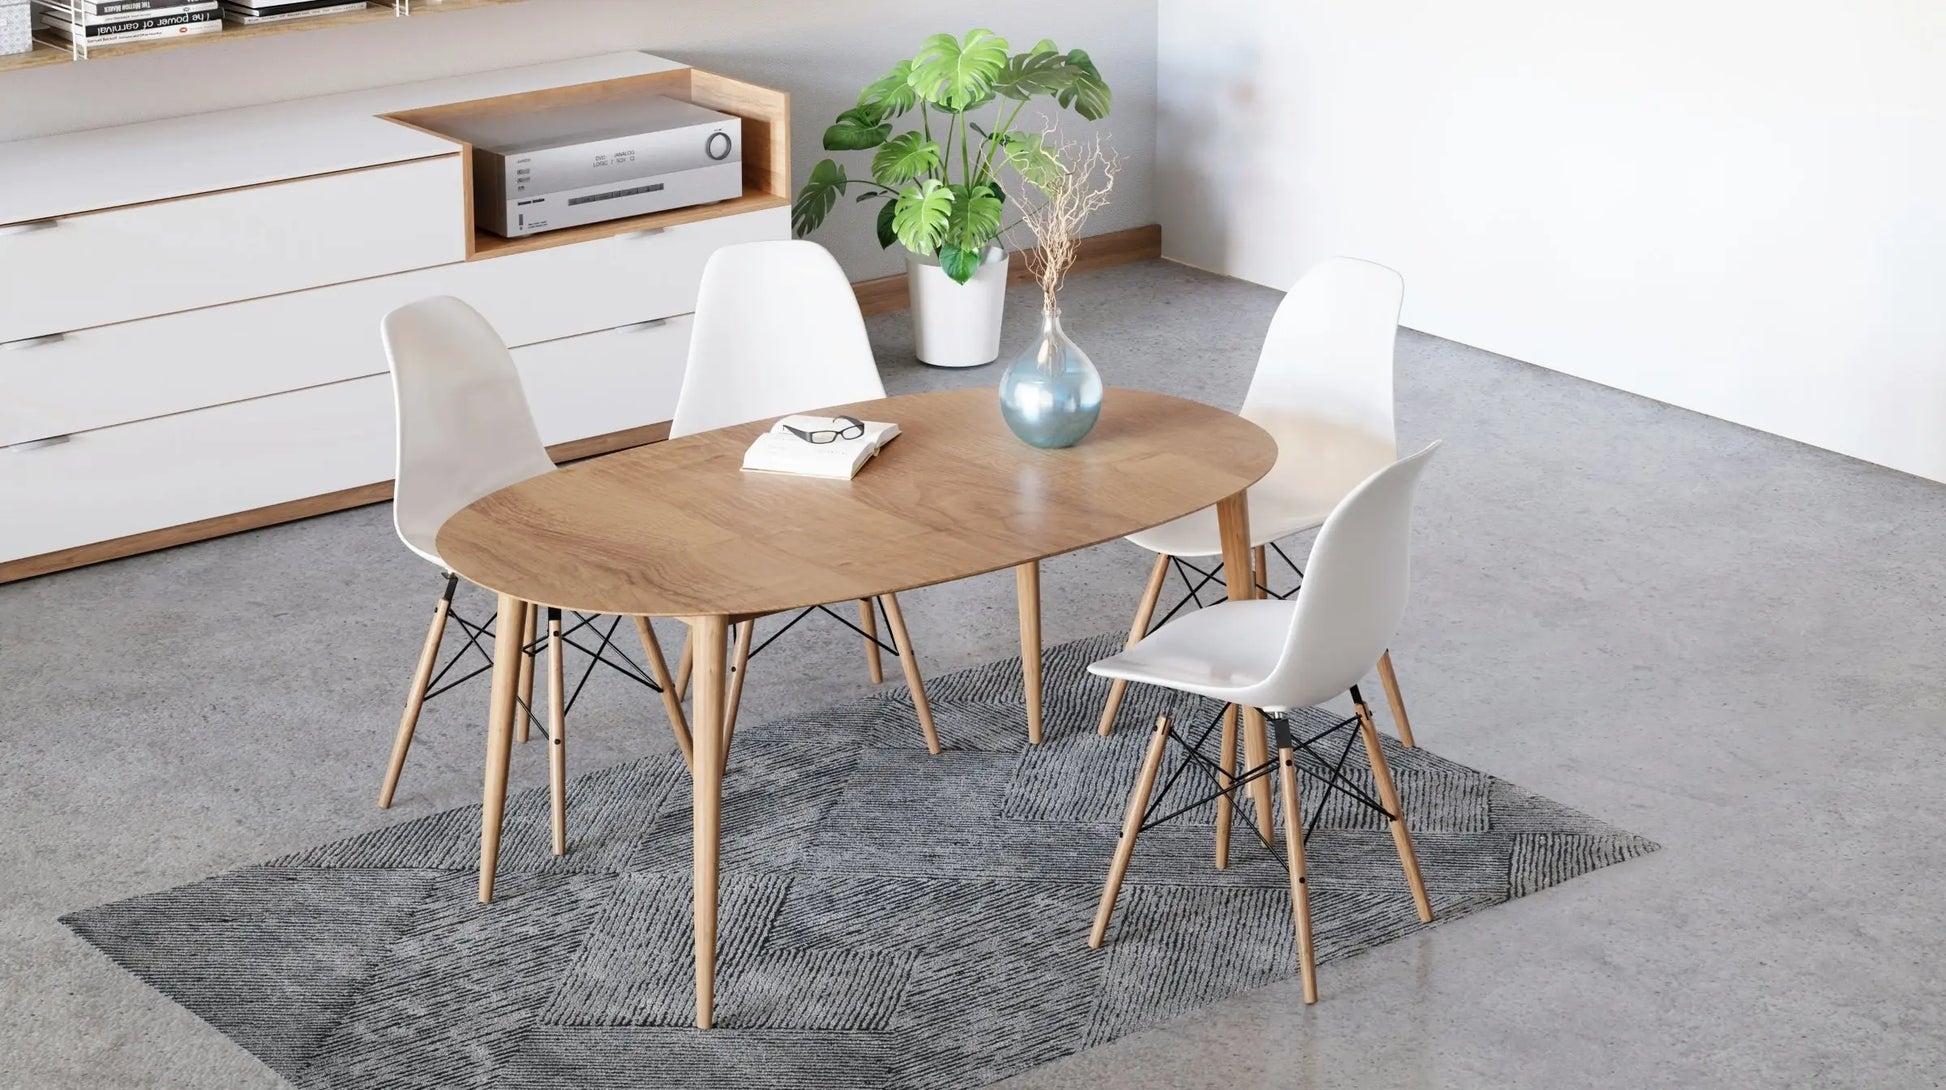 The Vista - Mid century Modern Dining Table, Extendable dining table Moderncre8ve